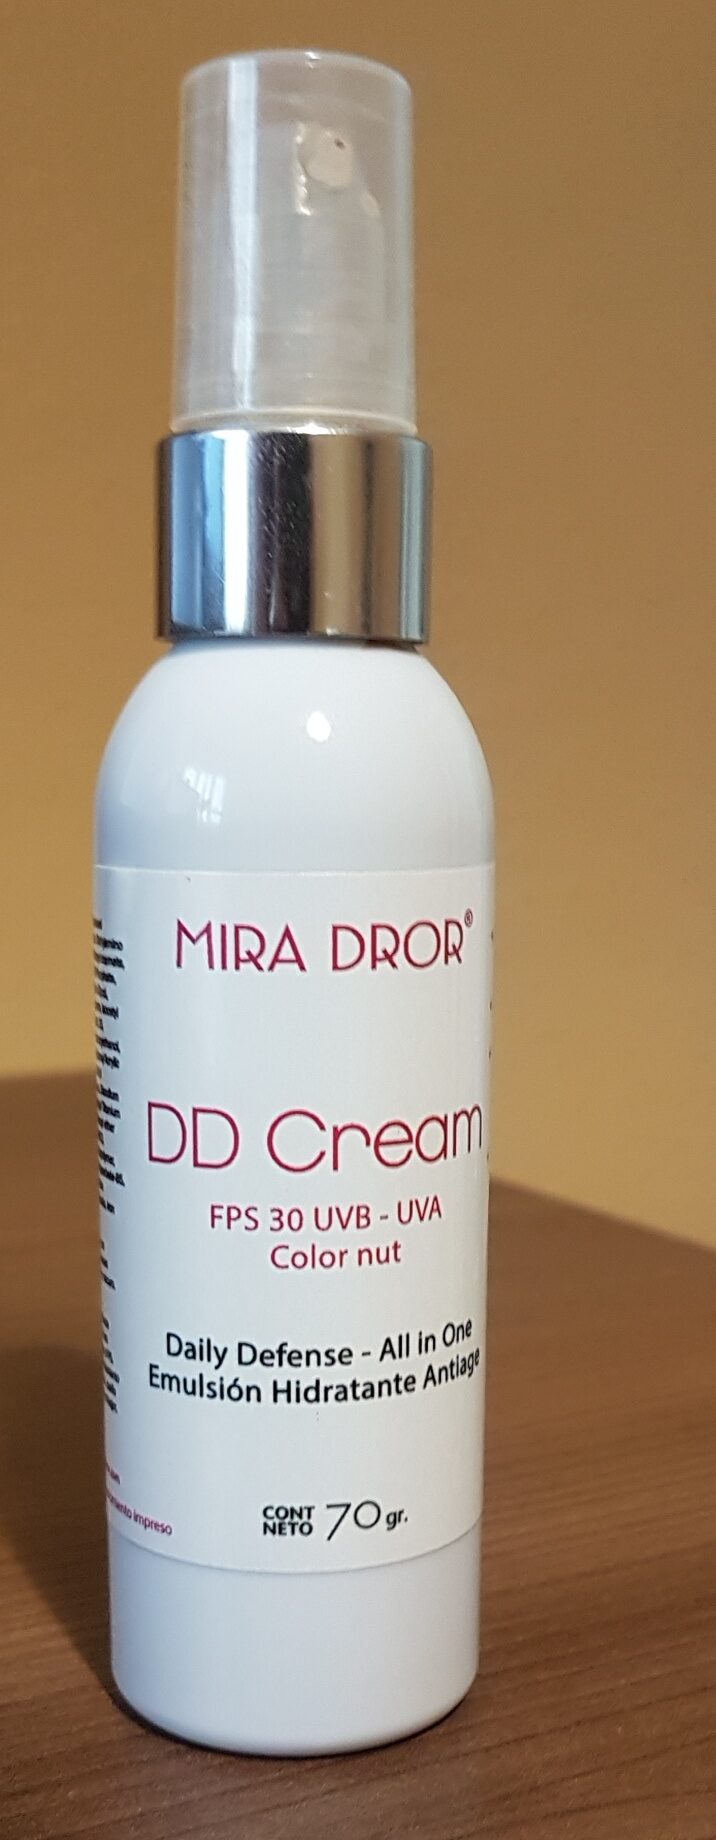 DD Cream and sunscreen - Product - en